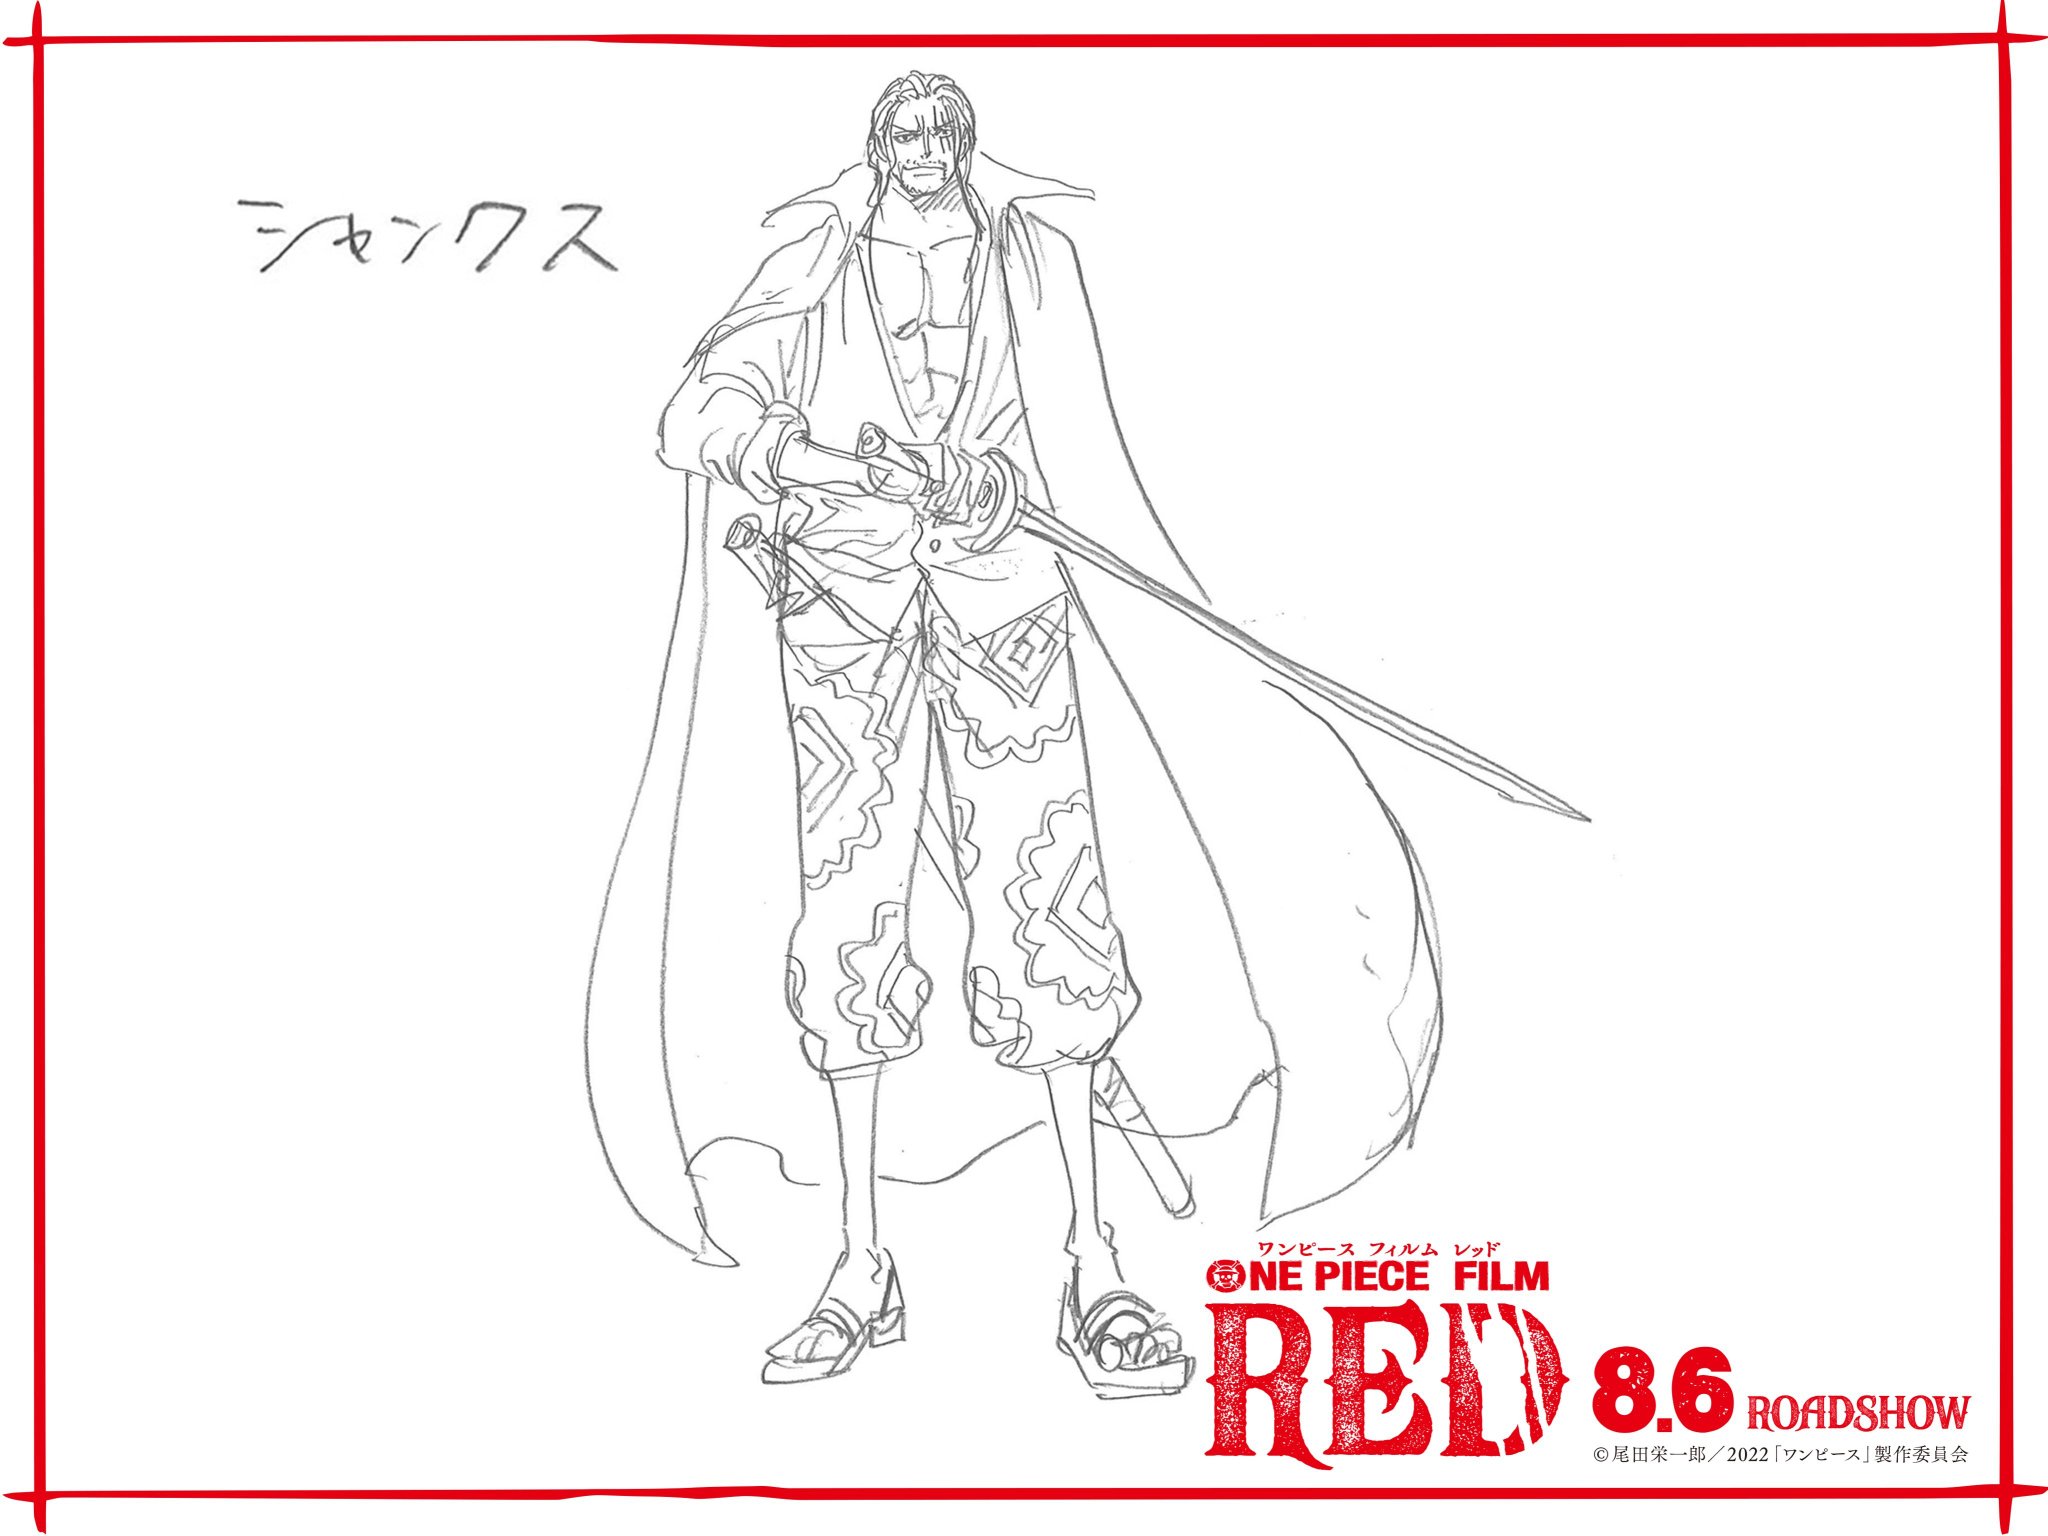 OROJAPAN - #ONEPIECE ONE PIECE FILM RED Character Designs for Uta, Shanks and Gordon